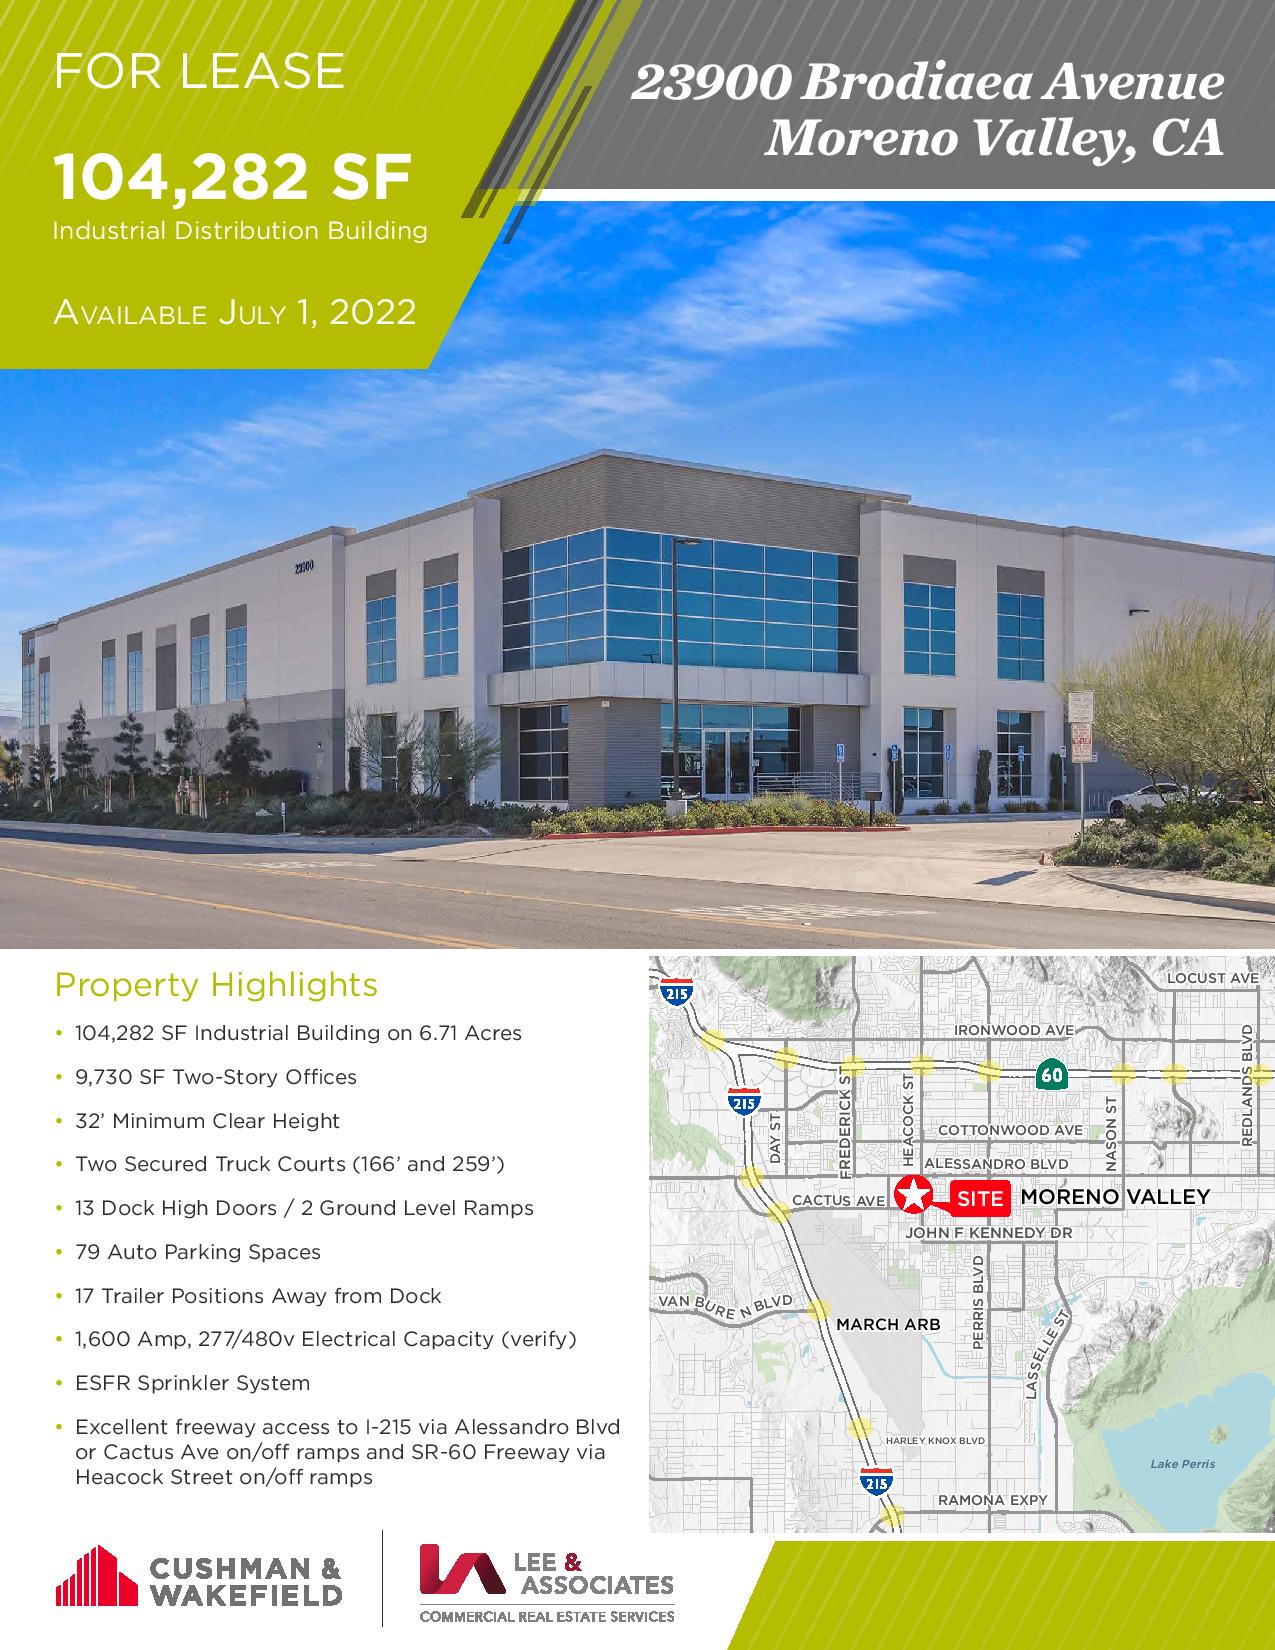 A flyer showing the location of a building for lease.